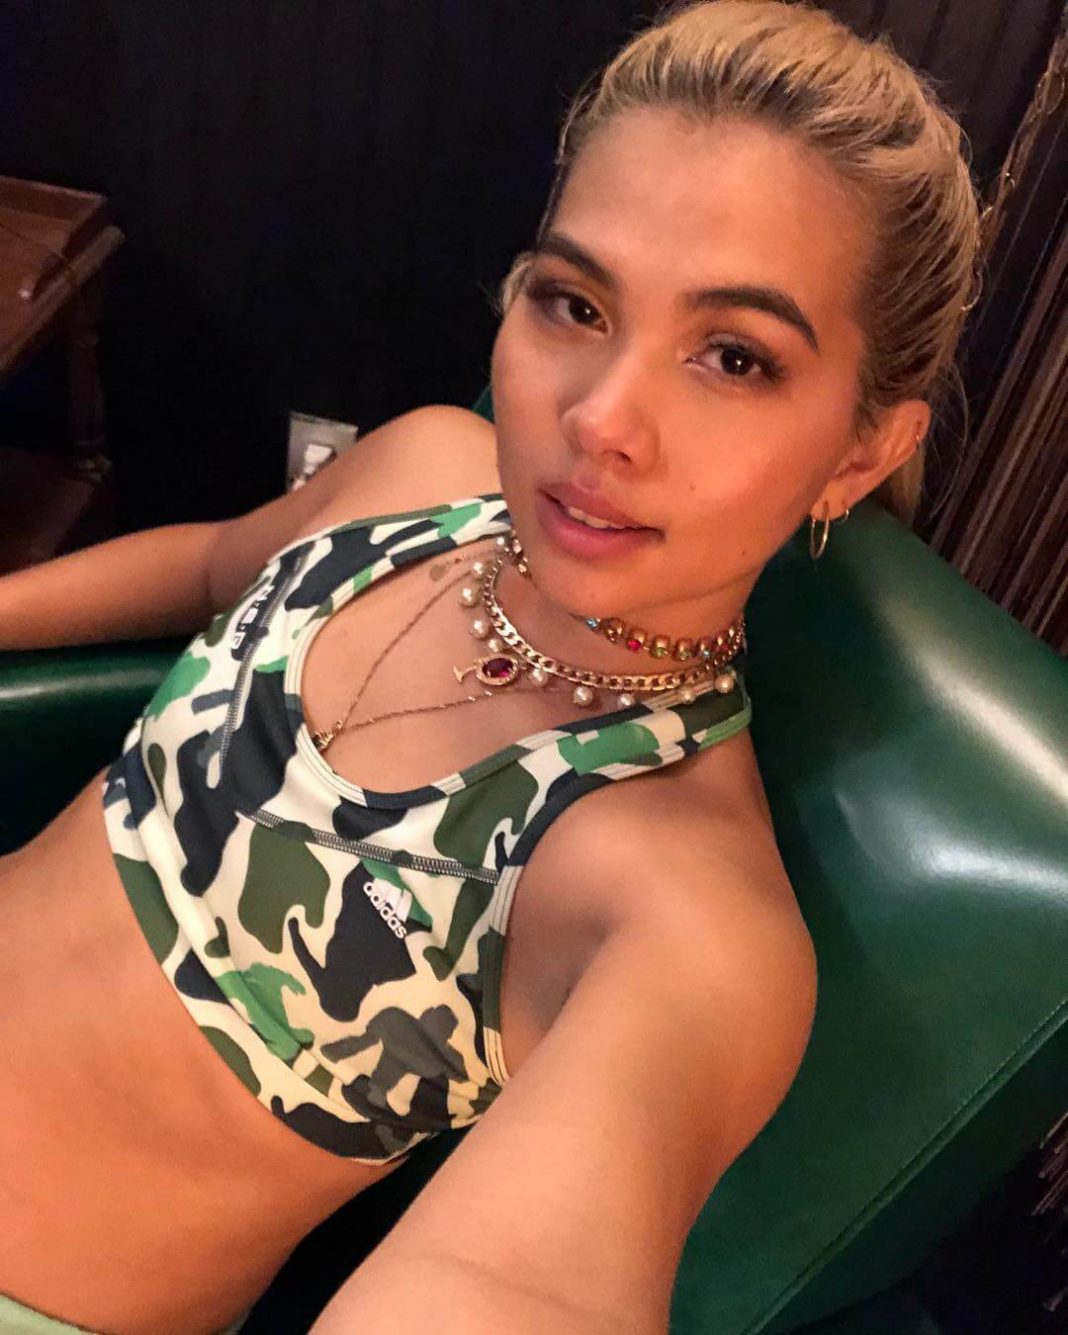 49 Hayley Kiyoko Nude Pictures Which Makes Her An Enigmatic Glamor Quotient 18